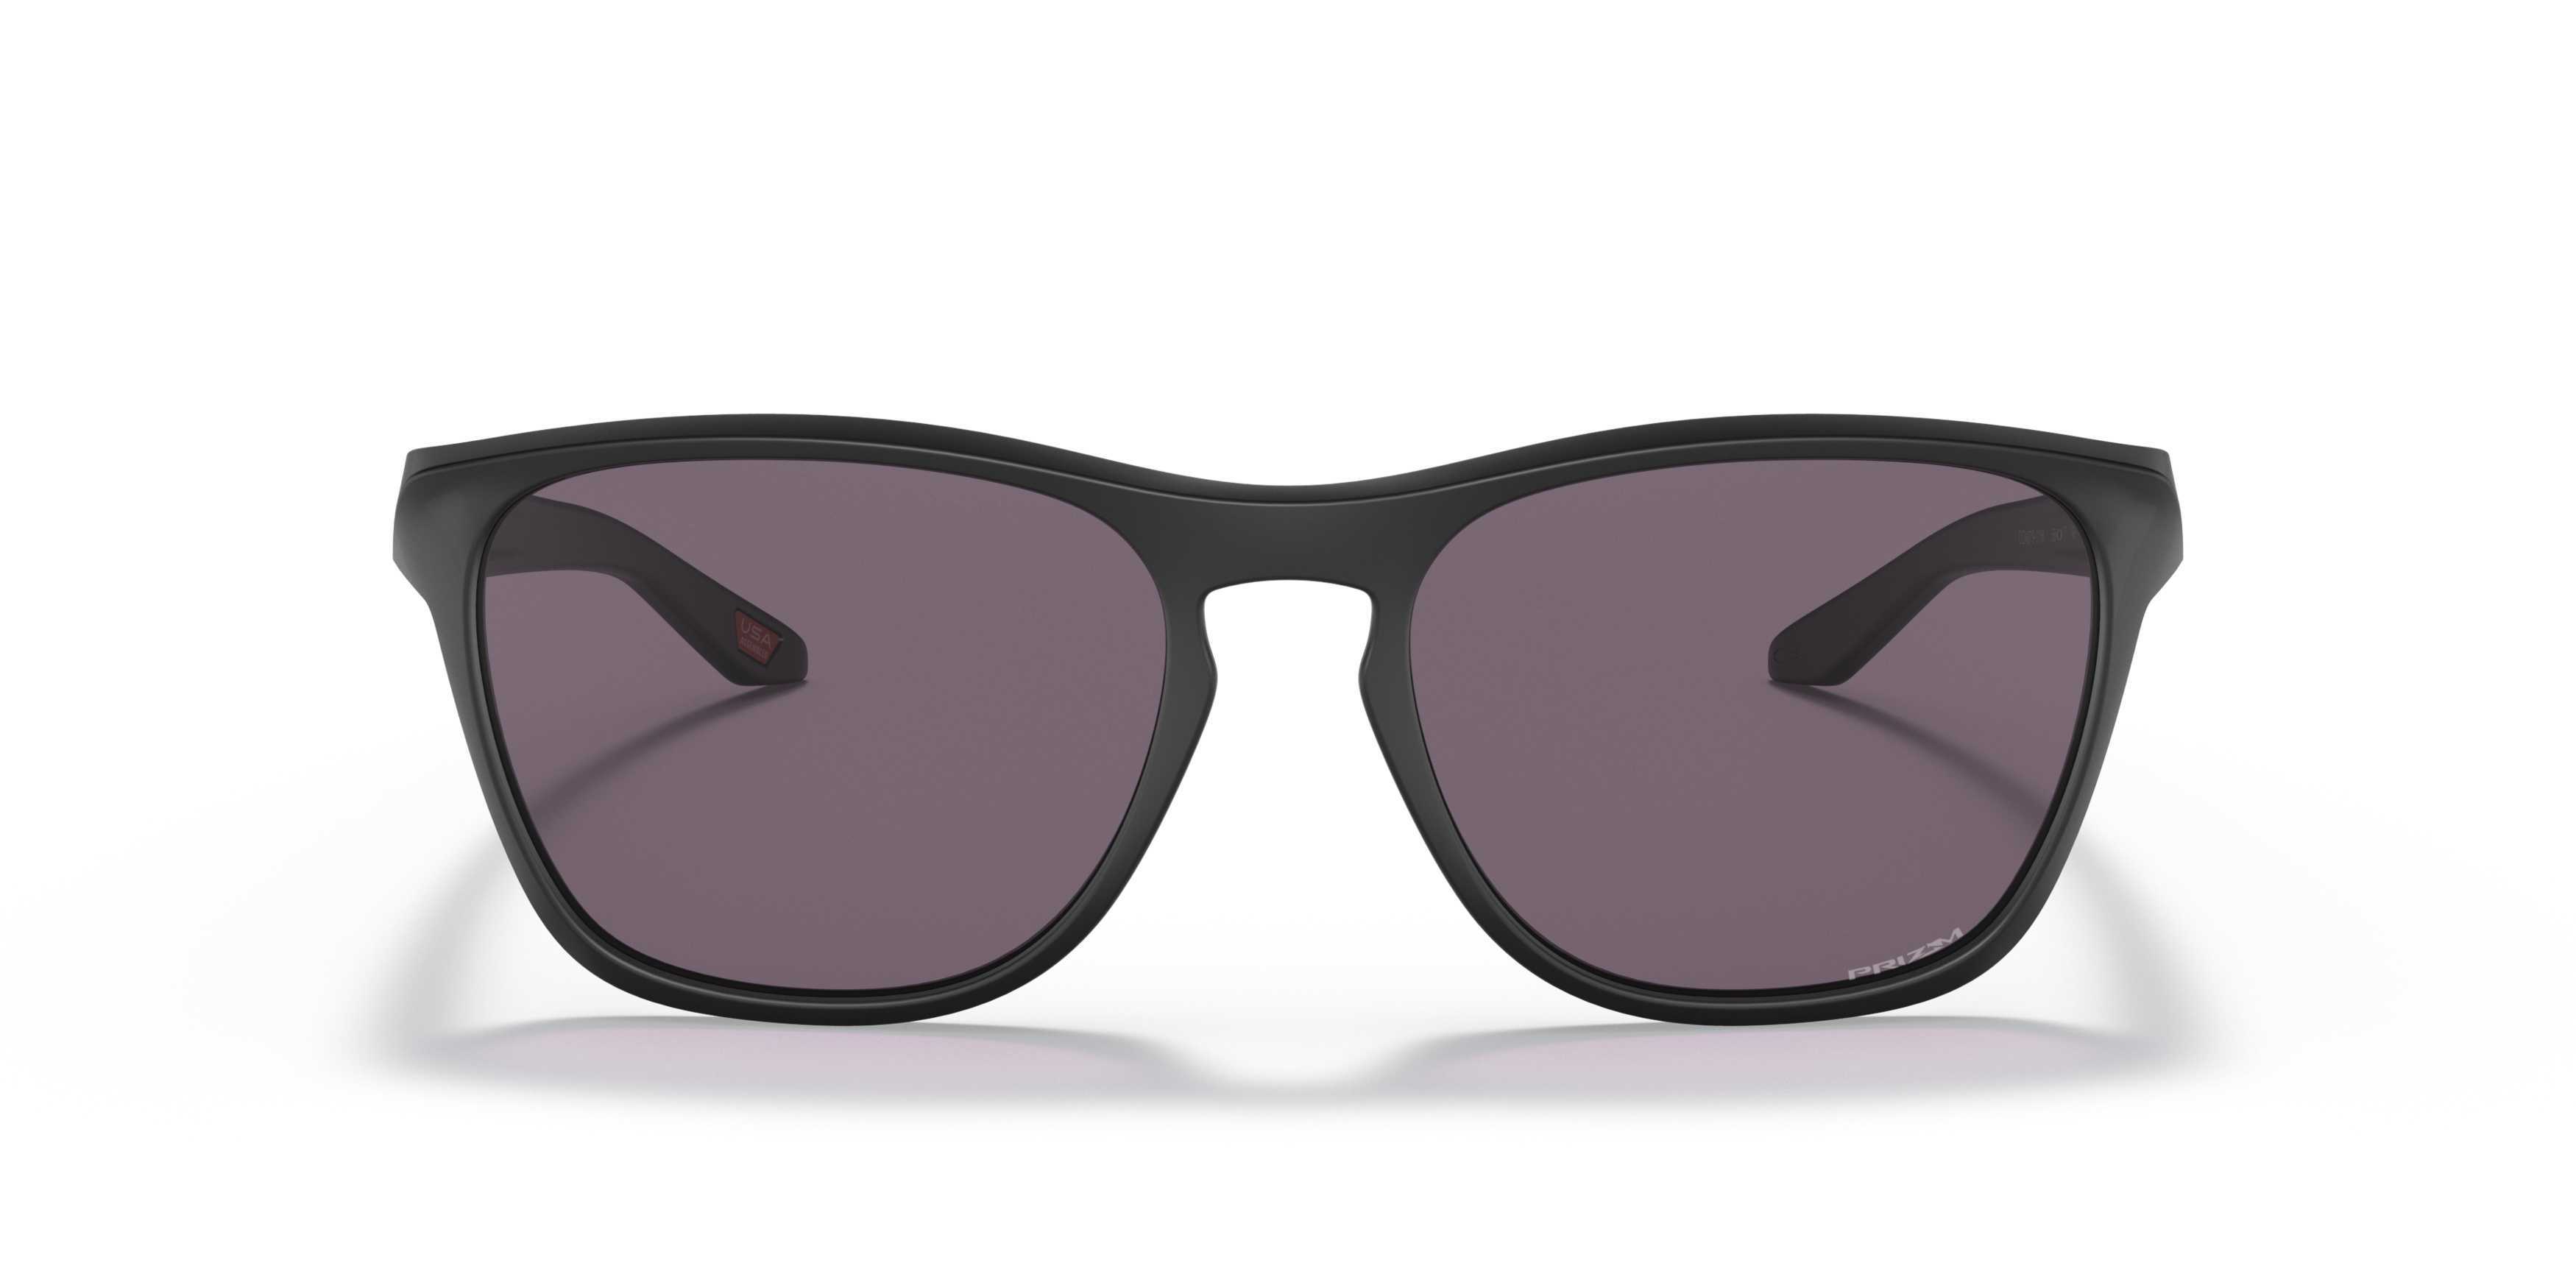 [products.image.front] Oakley 0OO9479 947901